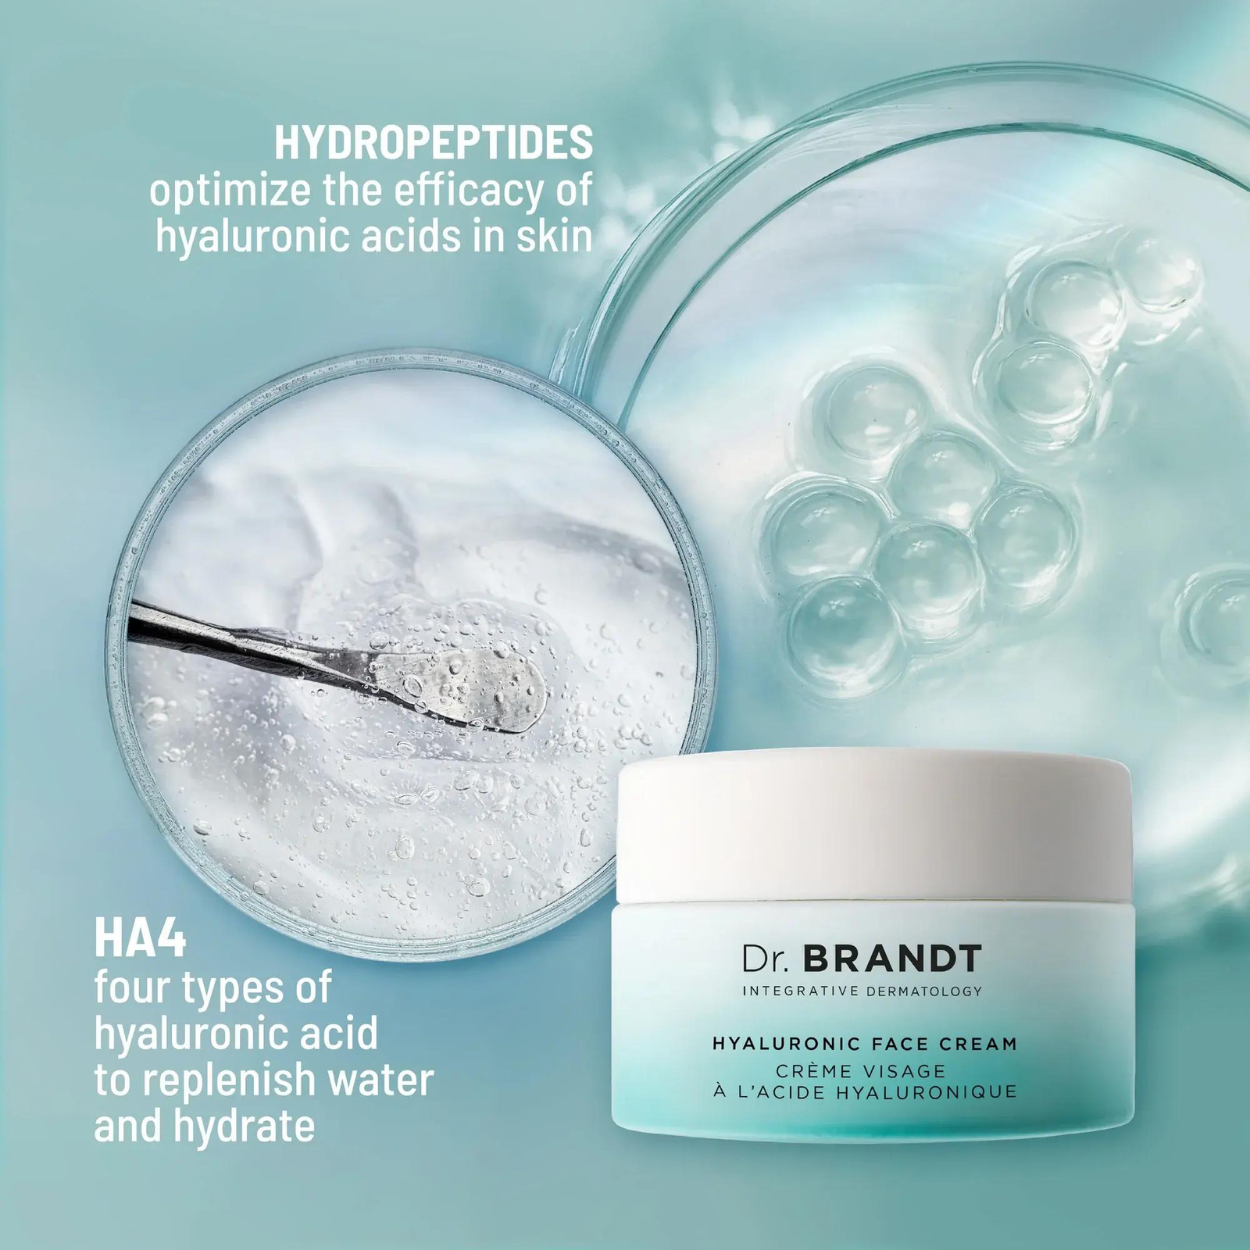 Needles No More Hyaluronic Face Cream 2.0